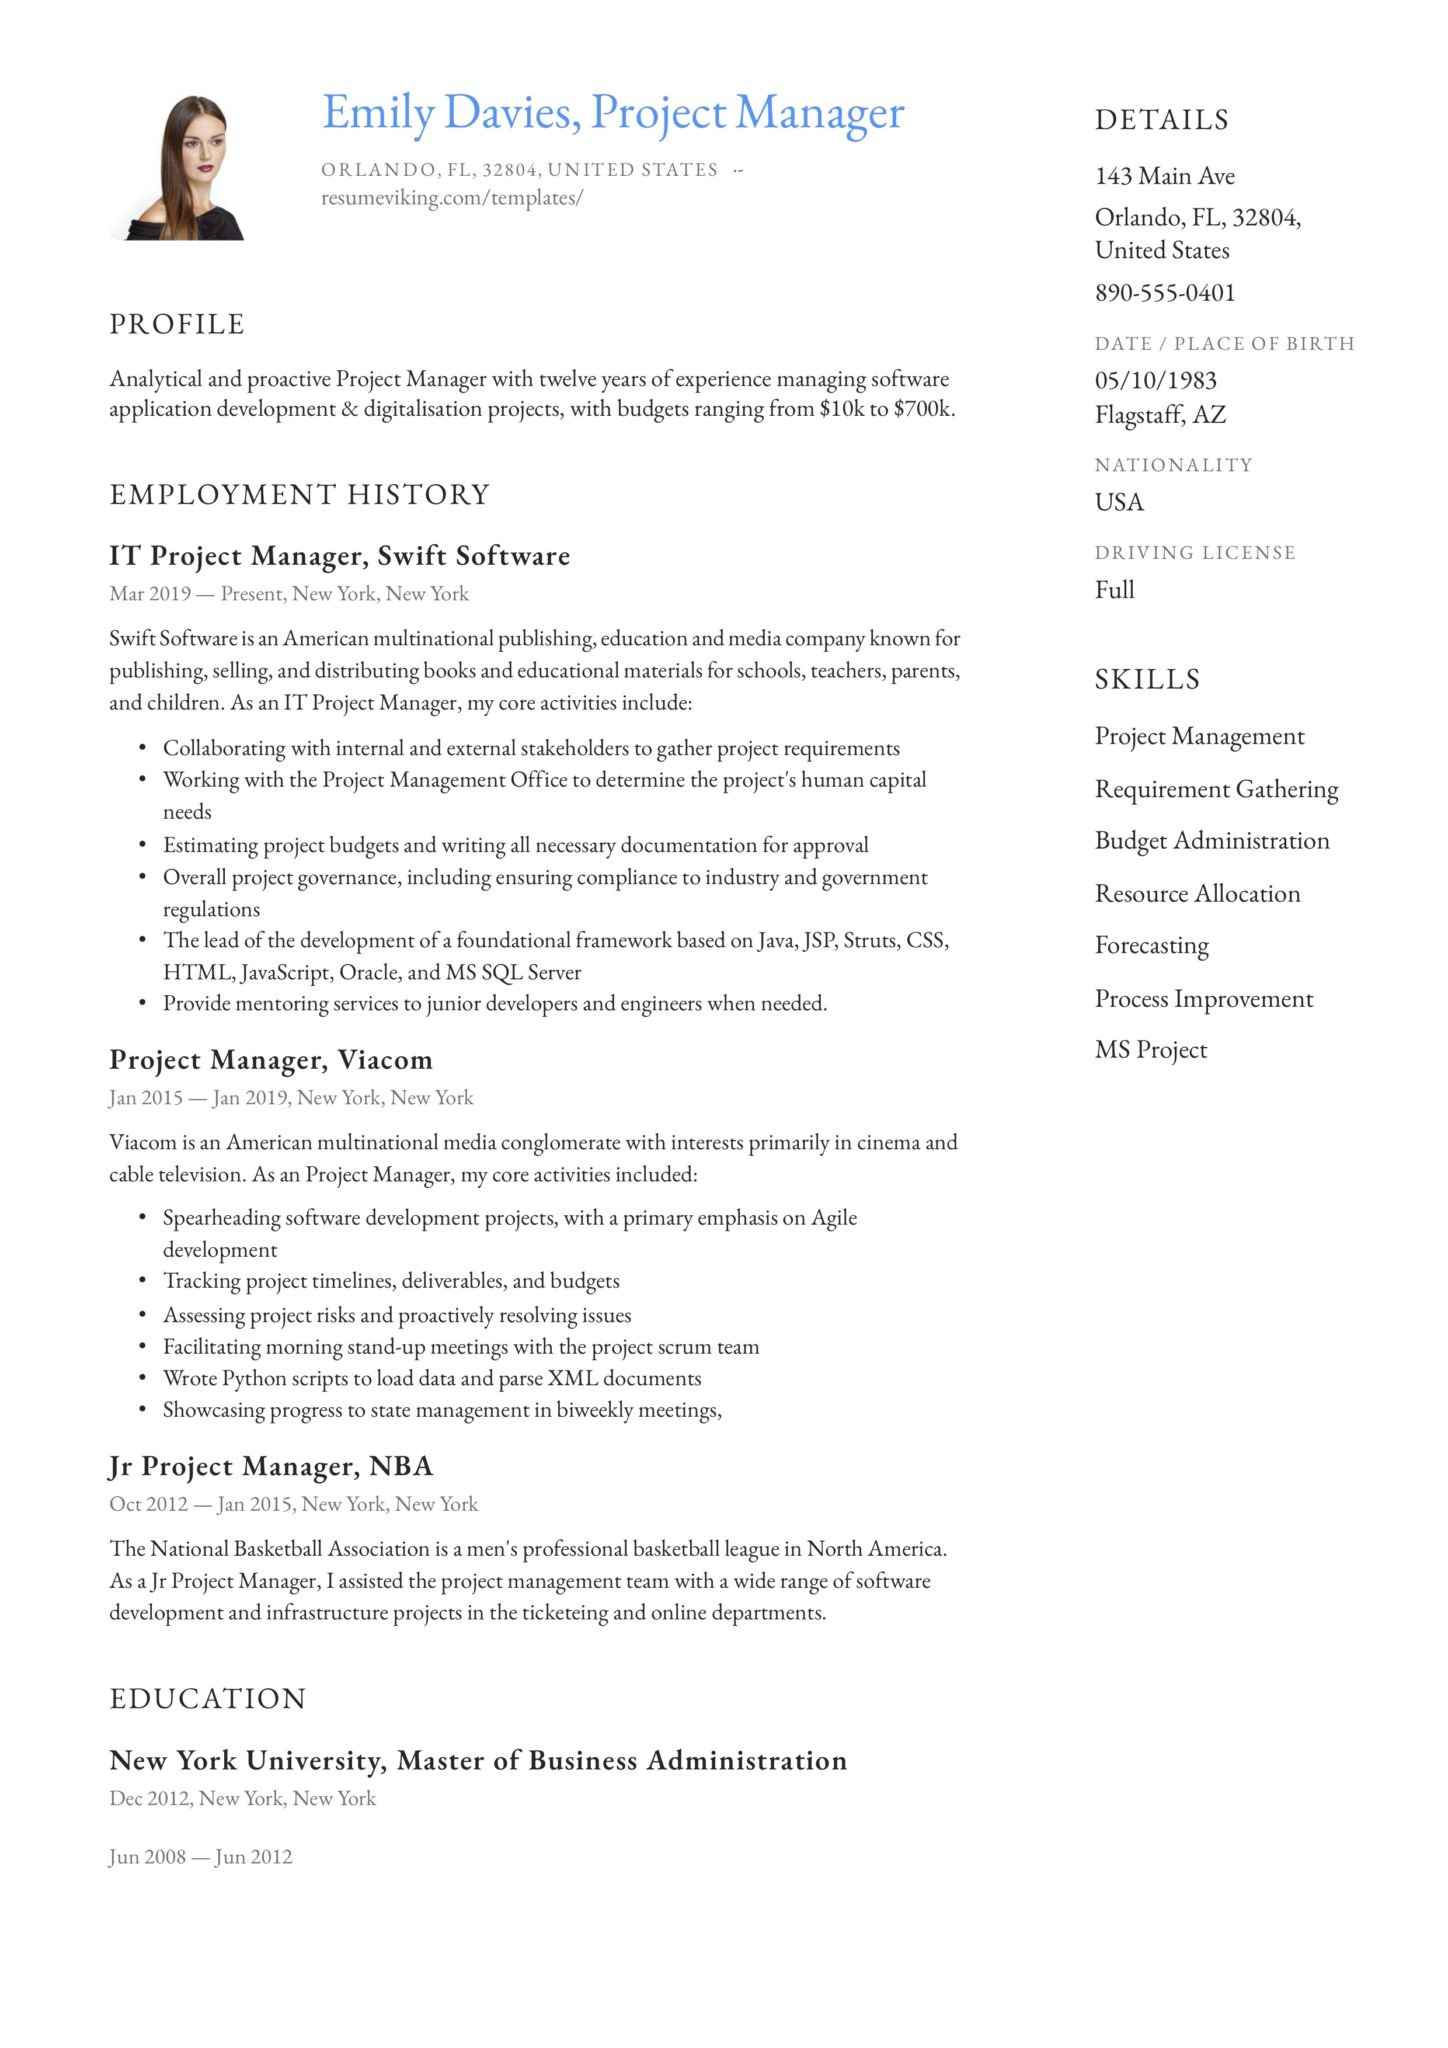 Software Project Manager Resume Sample India 20 Project Manager Resume Examples & Full Guide Pdf & Word 2021